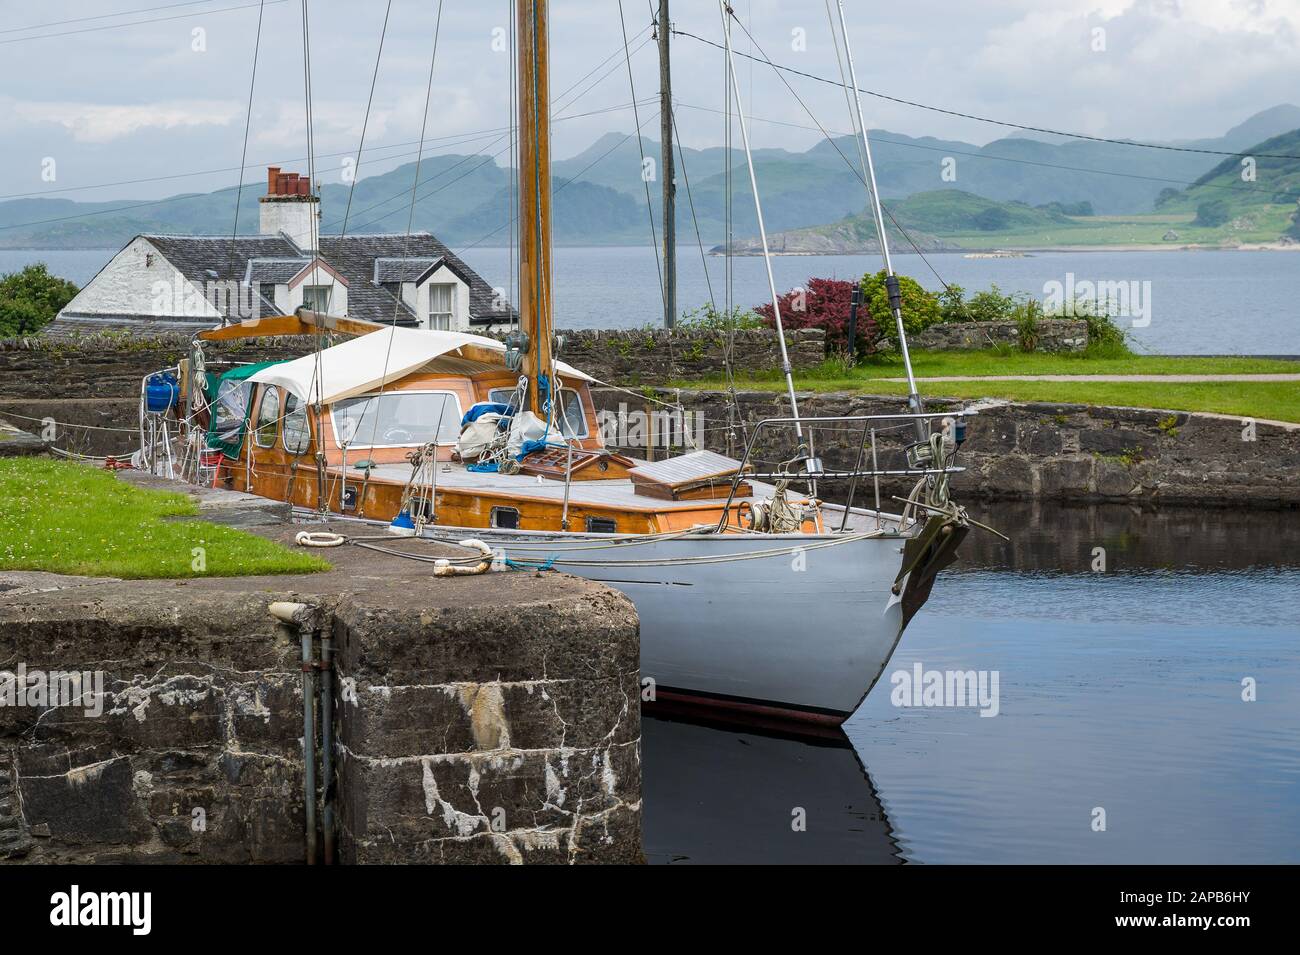 Sailing boat with white hull and old wooden deck and masts docked at Crinan, Scotland. Stock Photo